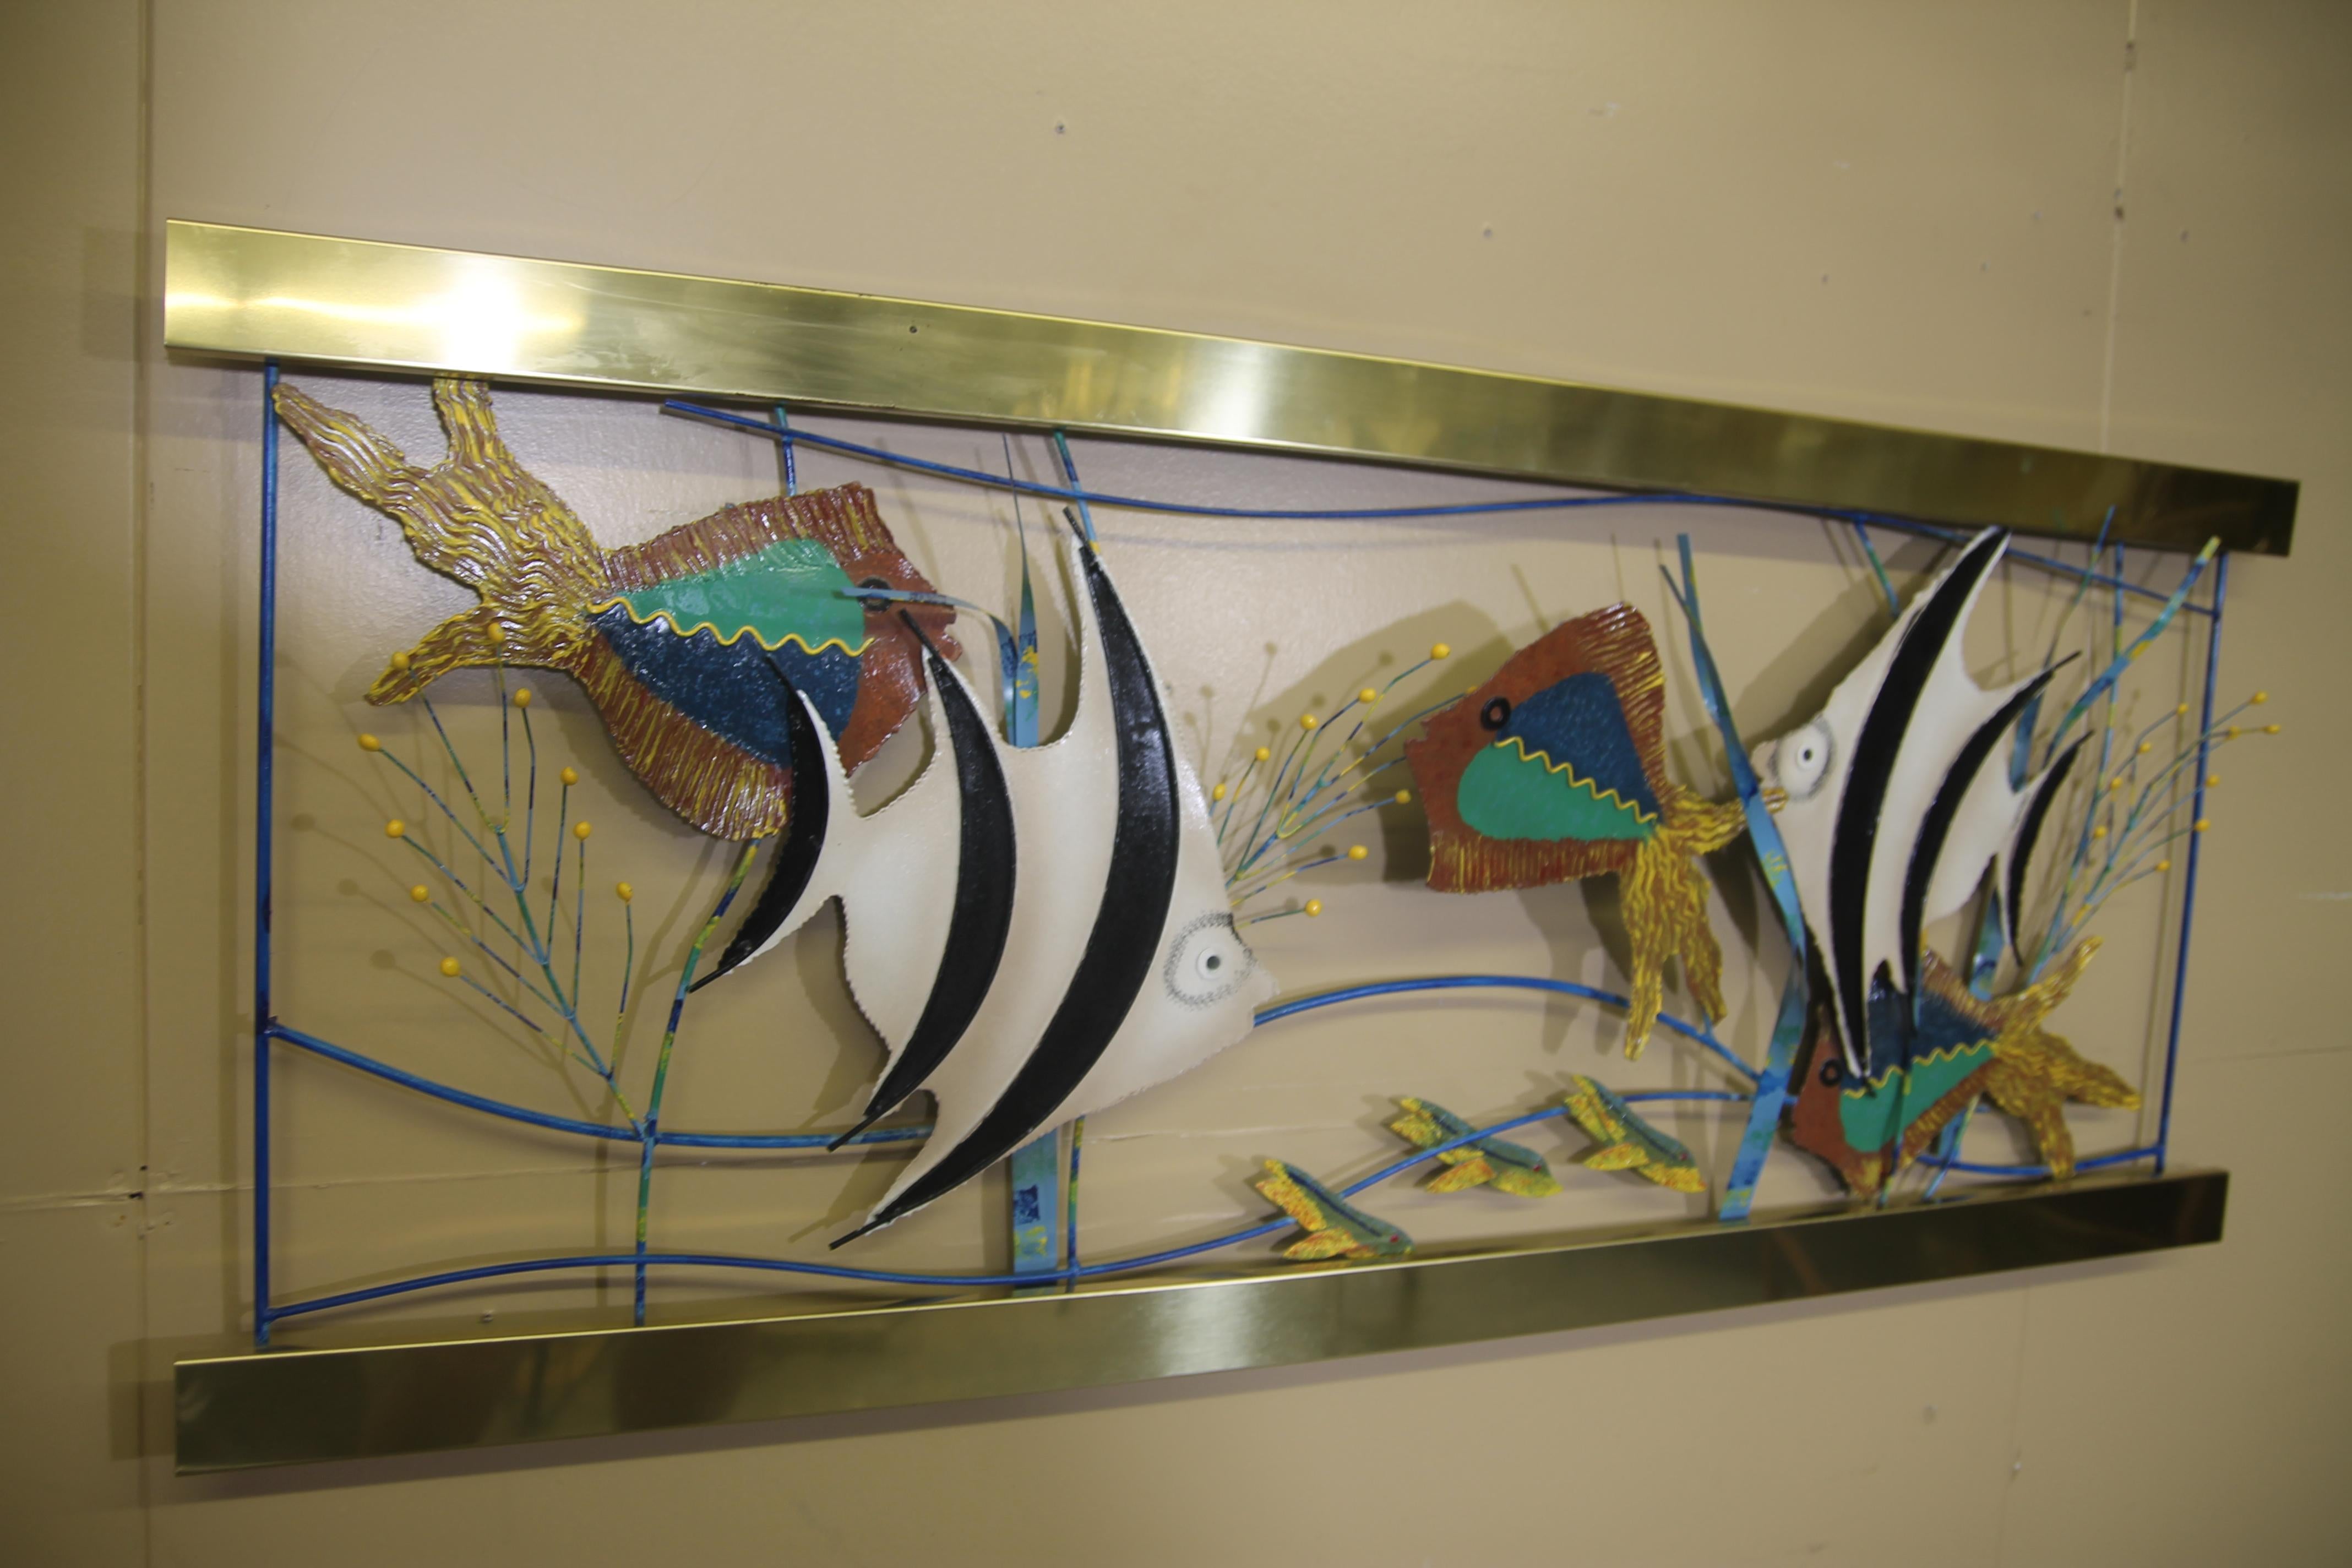 Rarely seen monumental Curtis Jere fish aquarium from 1993. This wall hanging piece is made of brass and painted metal. The wall art is dated and signed. It is in nice vintage condition.